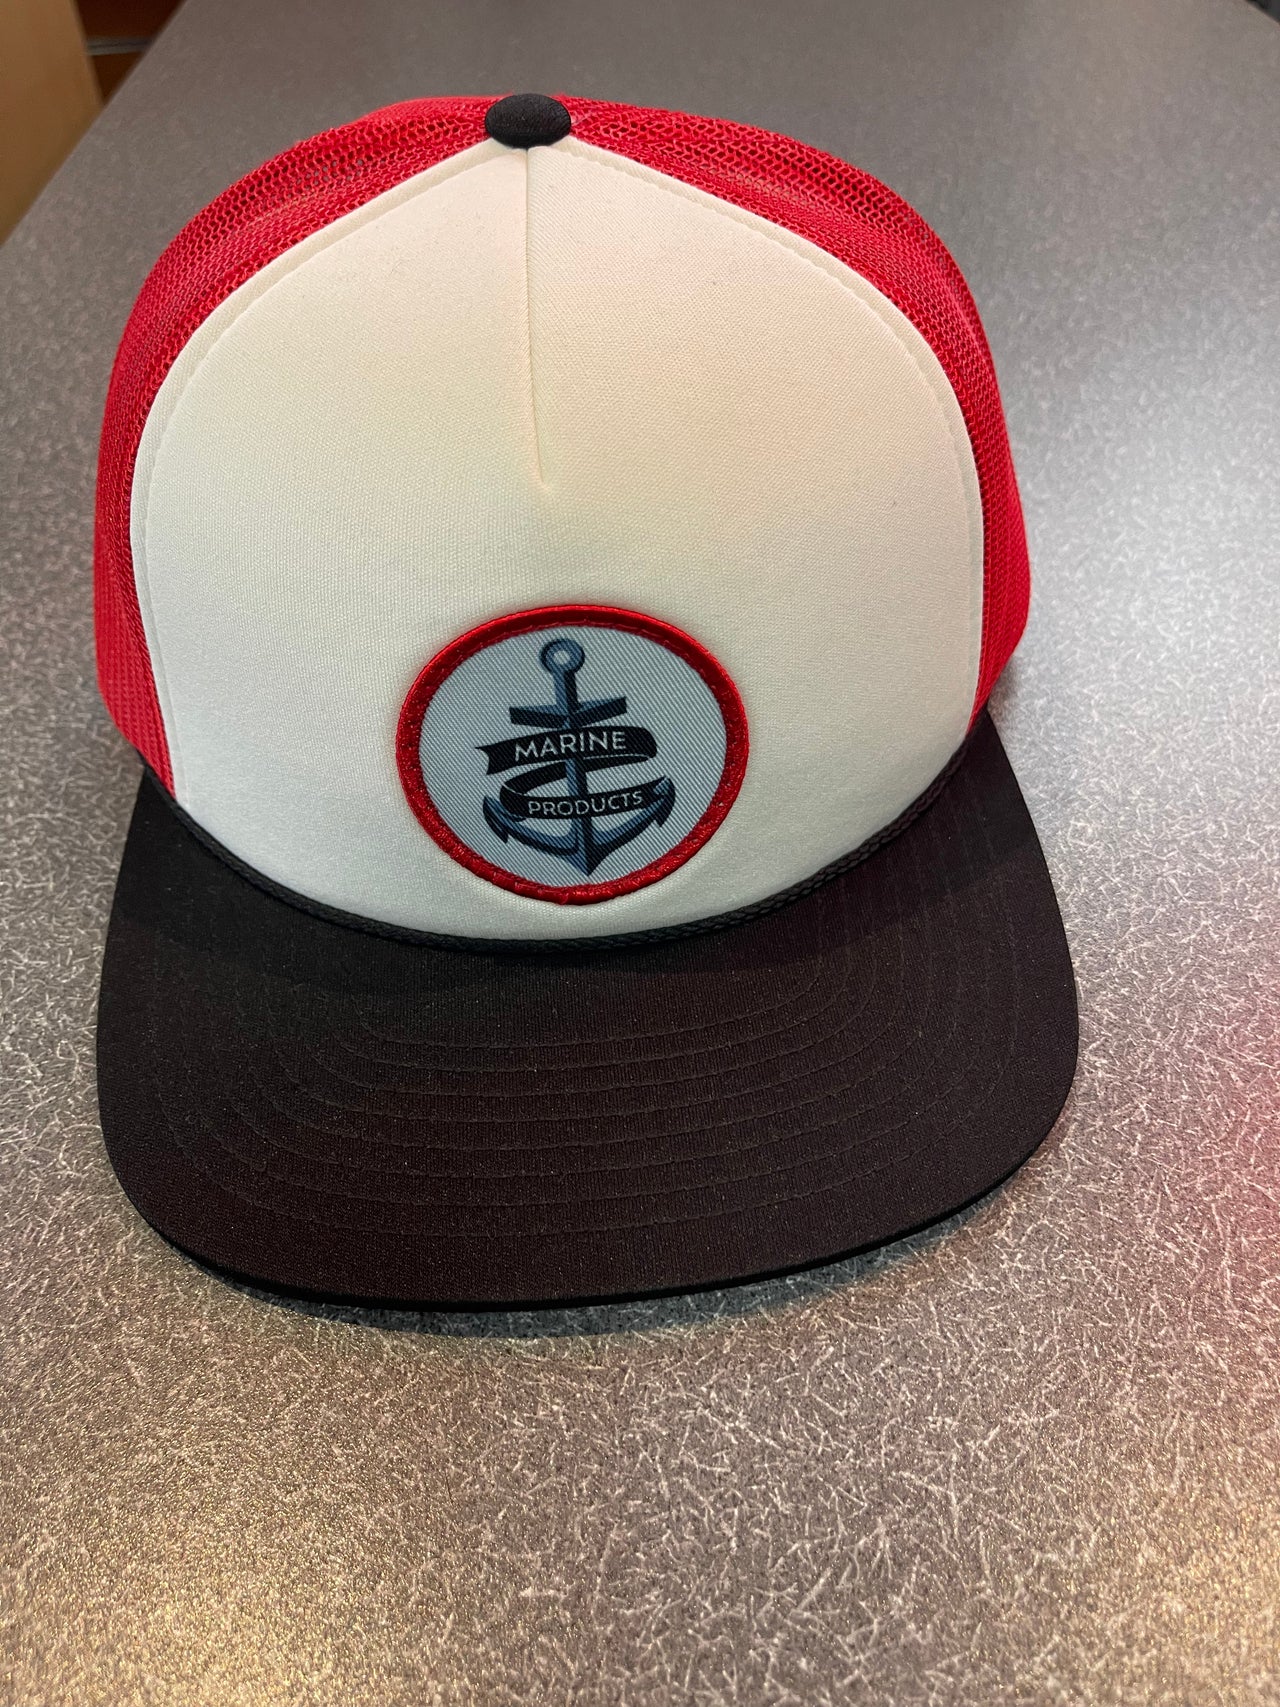 Marine Products White/Red/Black Trucker Hat w/ Anchor Patch